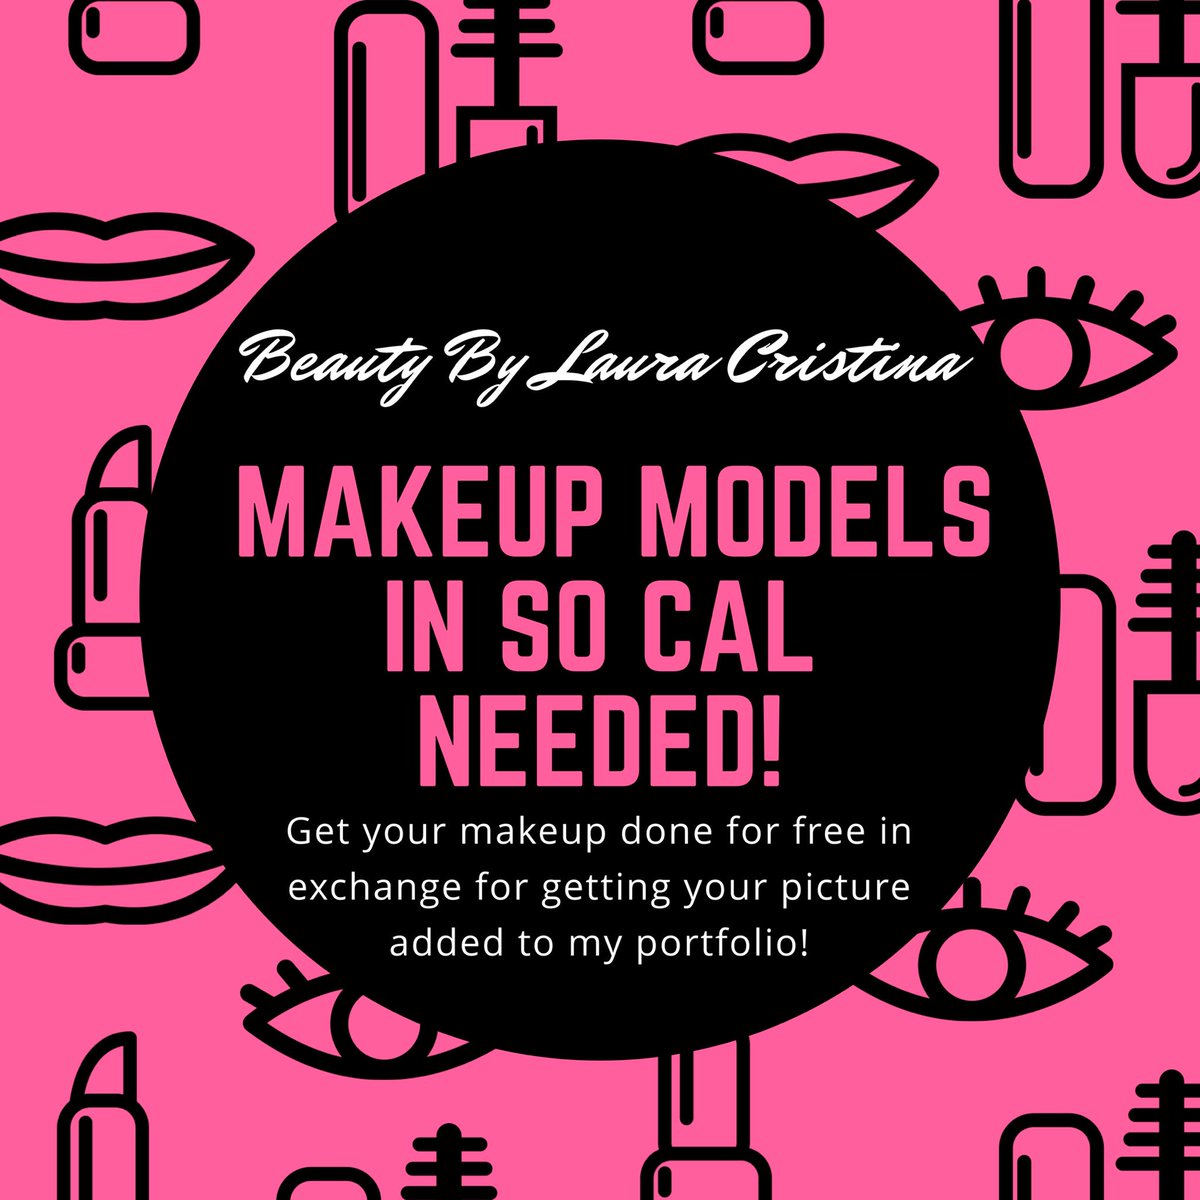 Live in SoCal & want your makeup done for free?! It can be for special occasions or just for fun. I’ll just need to take your picture to add to my portfolio. You can come to me or I can come to you! Message me if you’re interested! #sdmua #sandiegomakeupartist #sdmakeupartist